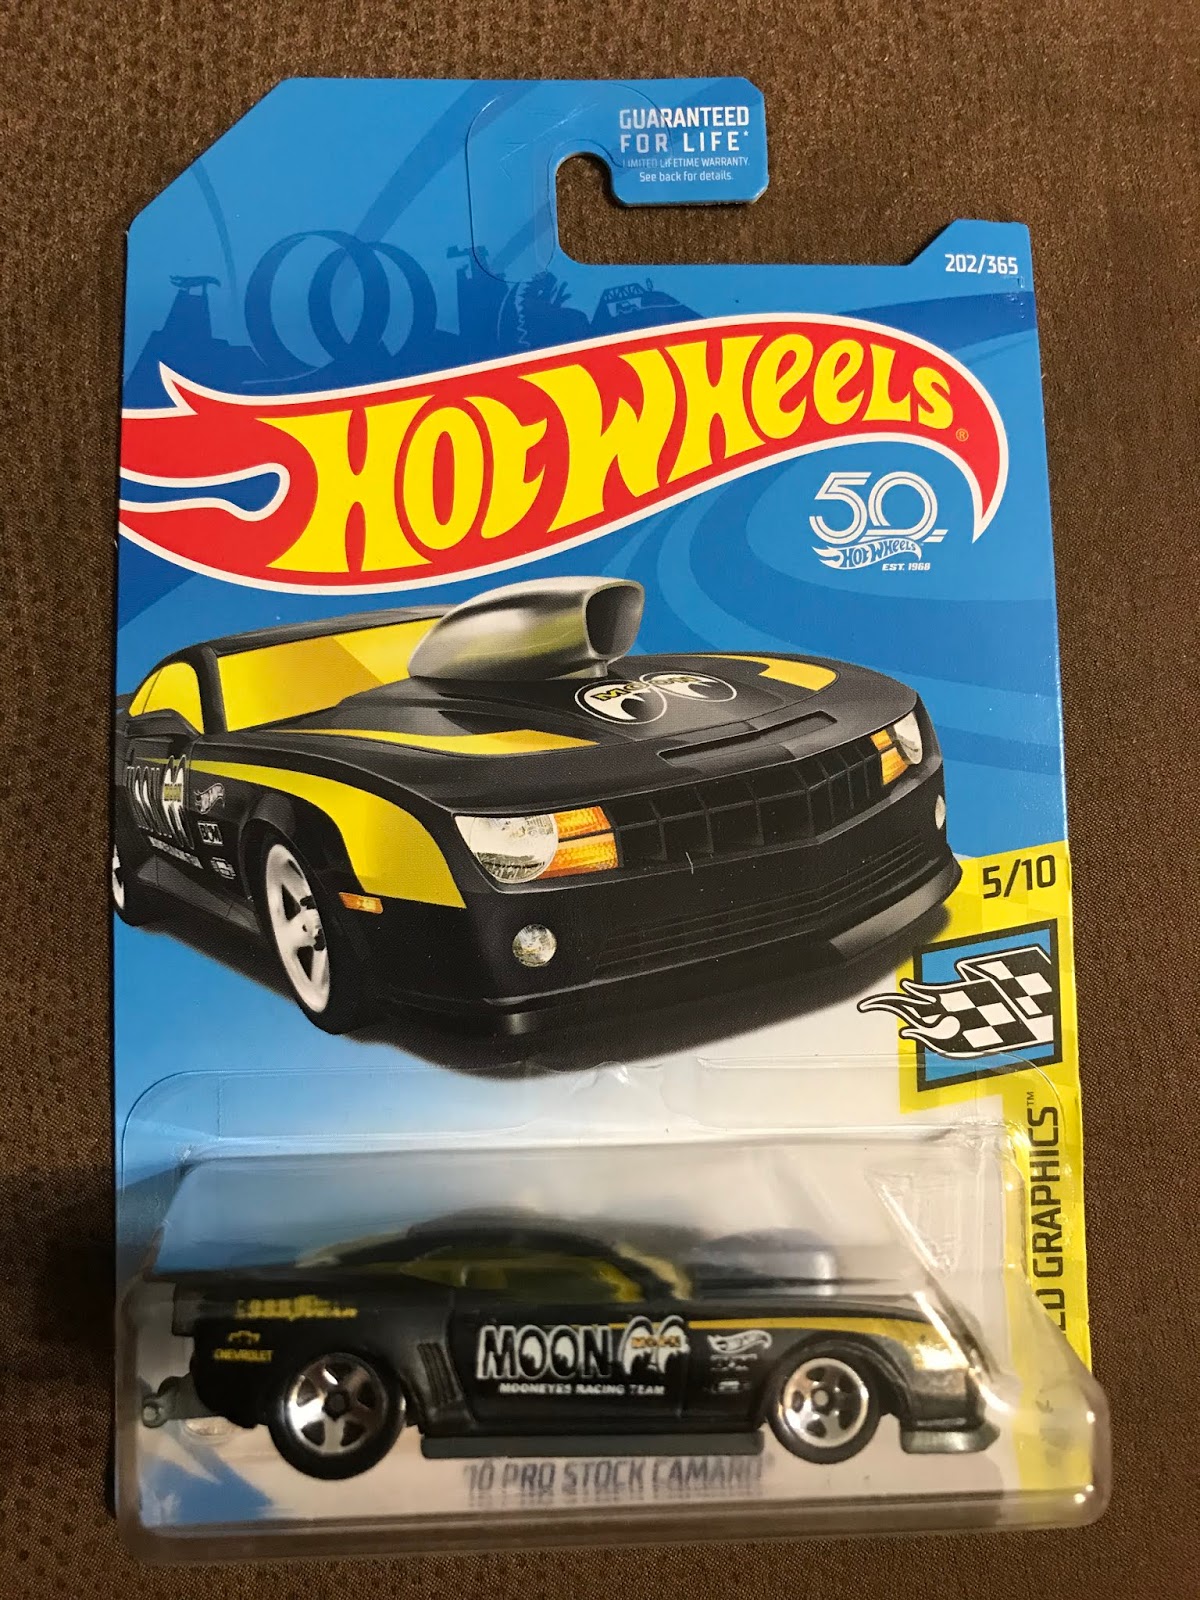 Hot Wheels Casting and Price Guide of Model released from 2008 to 2017